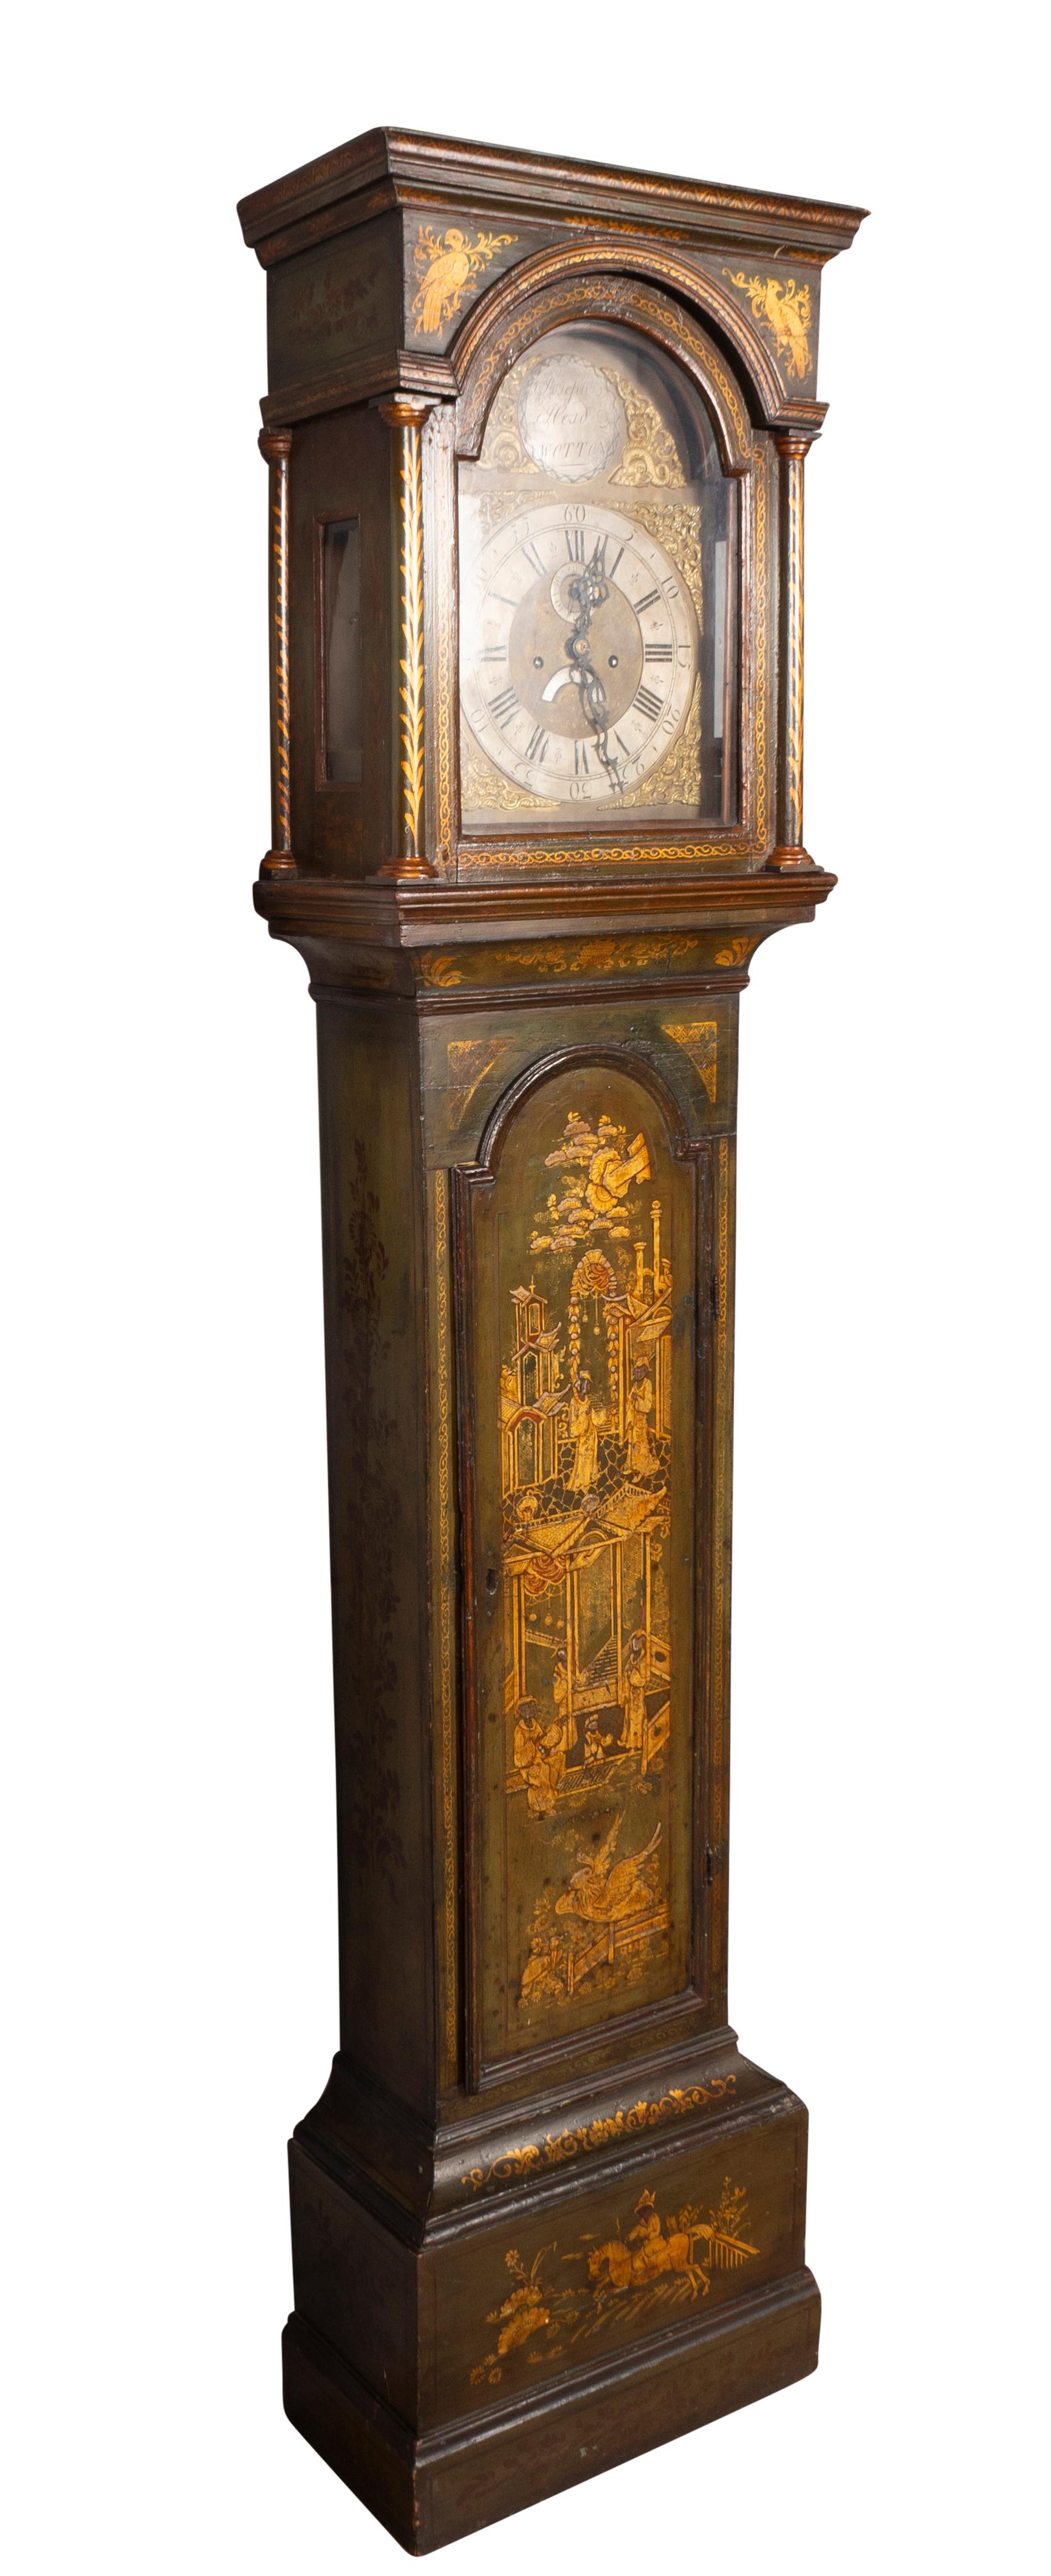 By Joseph Head from Wotton Surrey. Flat top over a glazed door opening to a brass clock works all redone and ready for install. The case with a beautiful subtle green and gilt chinoiserie decoration. With pendulum and weights. Chimes the hour. Seven